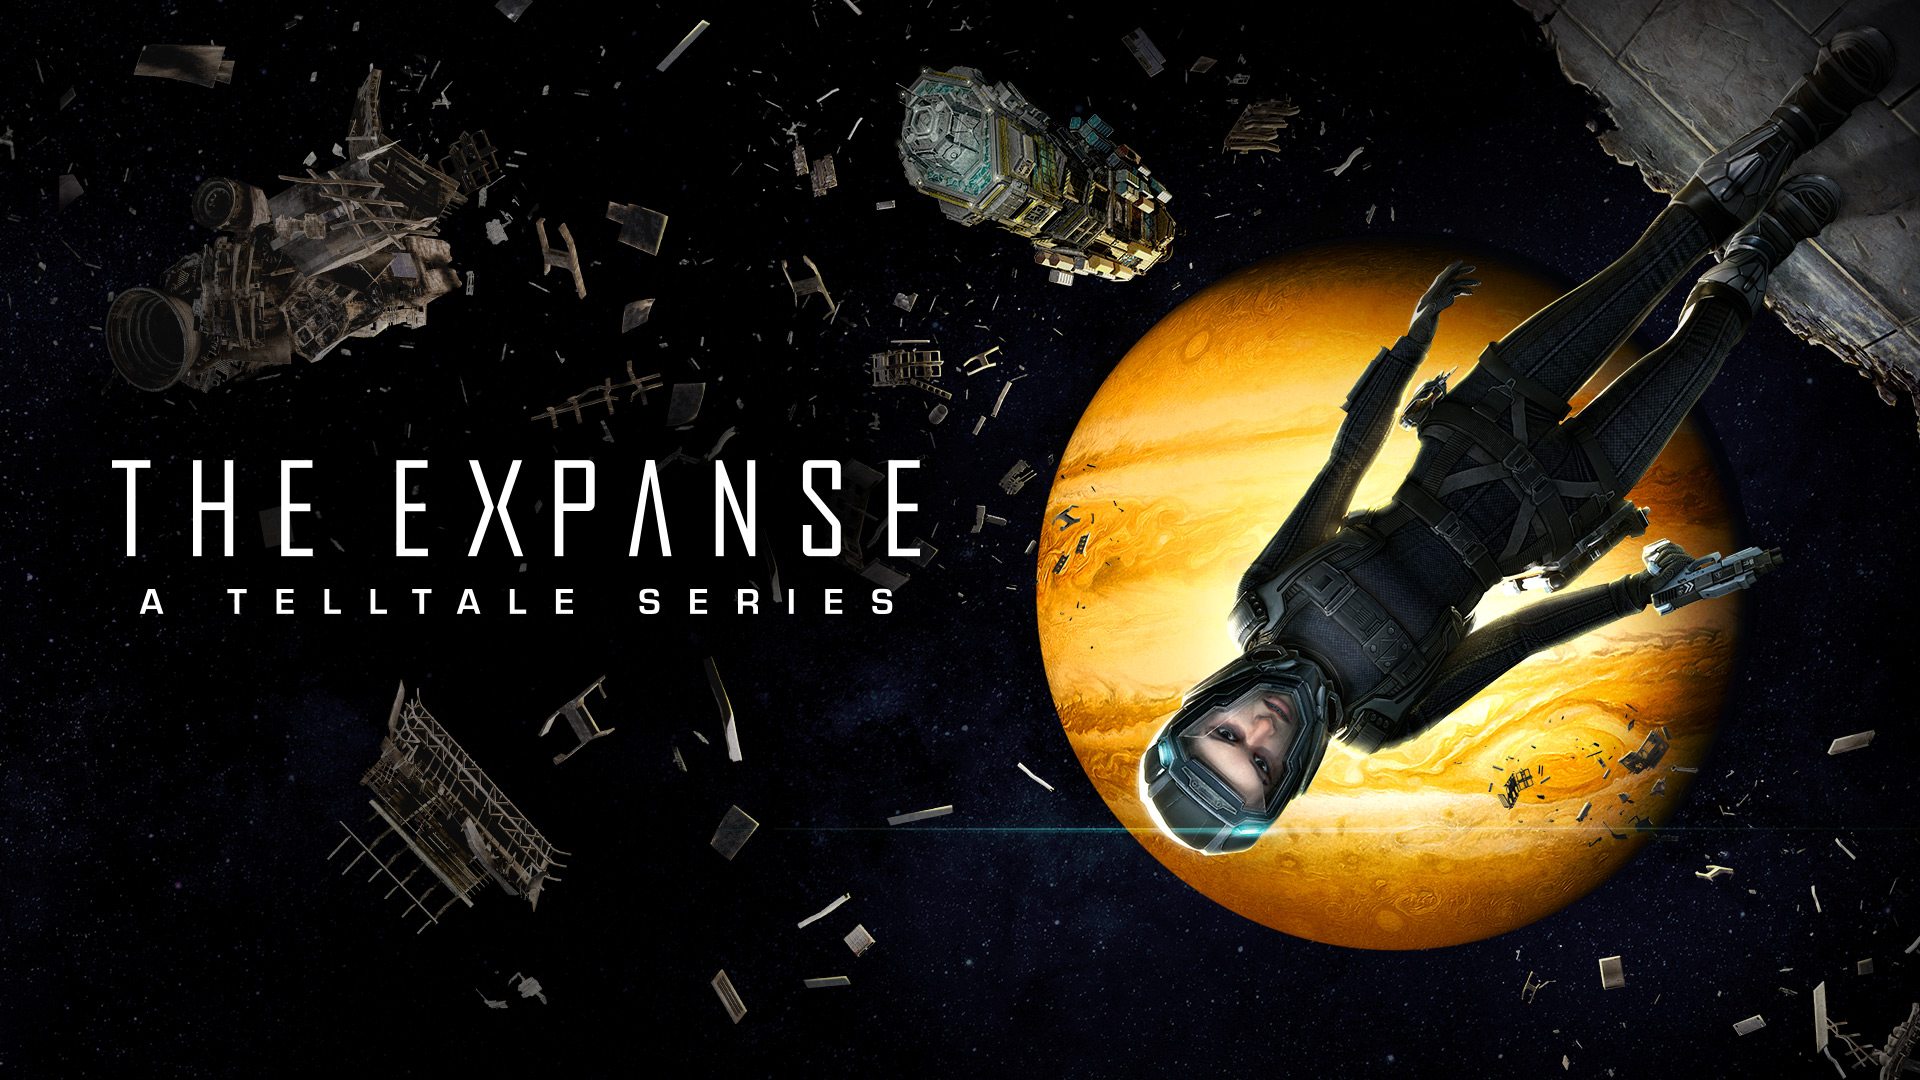 The Expanse A Telltale Series launches July 27